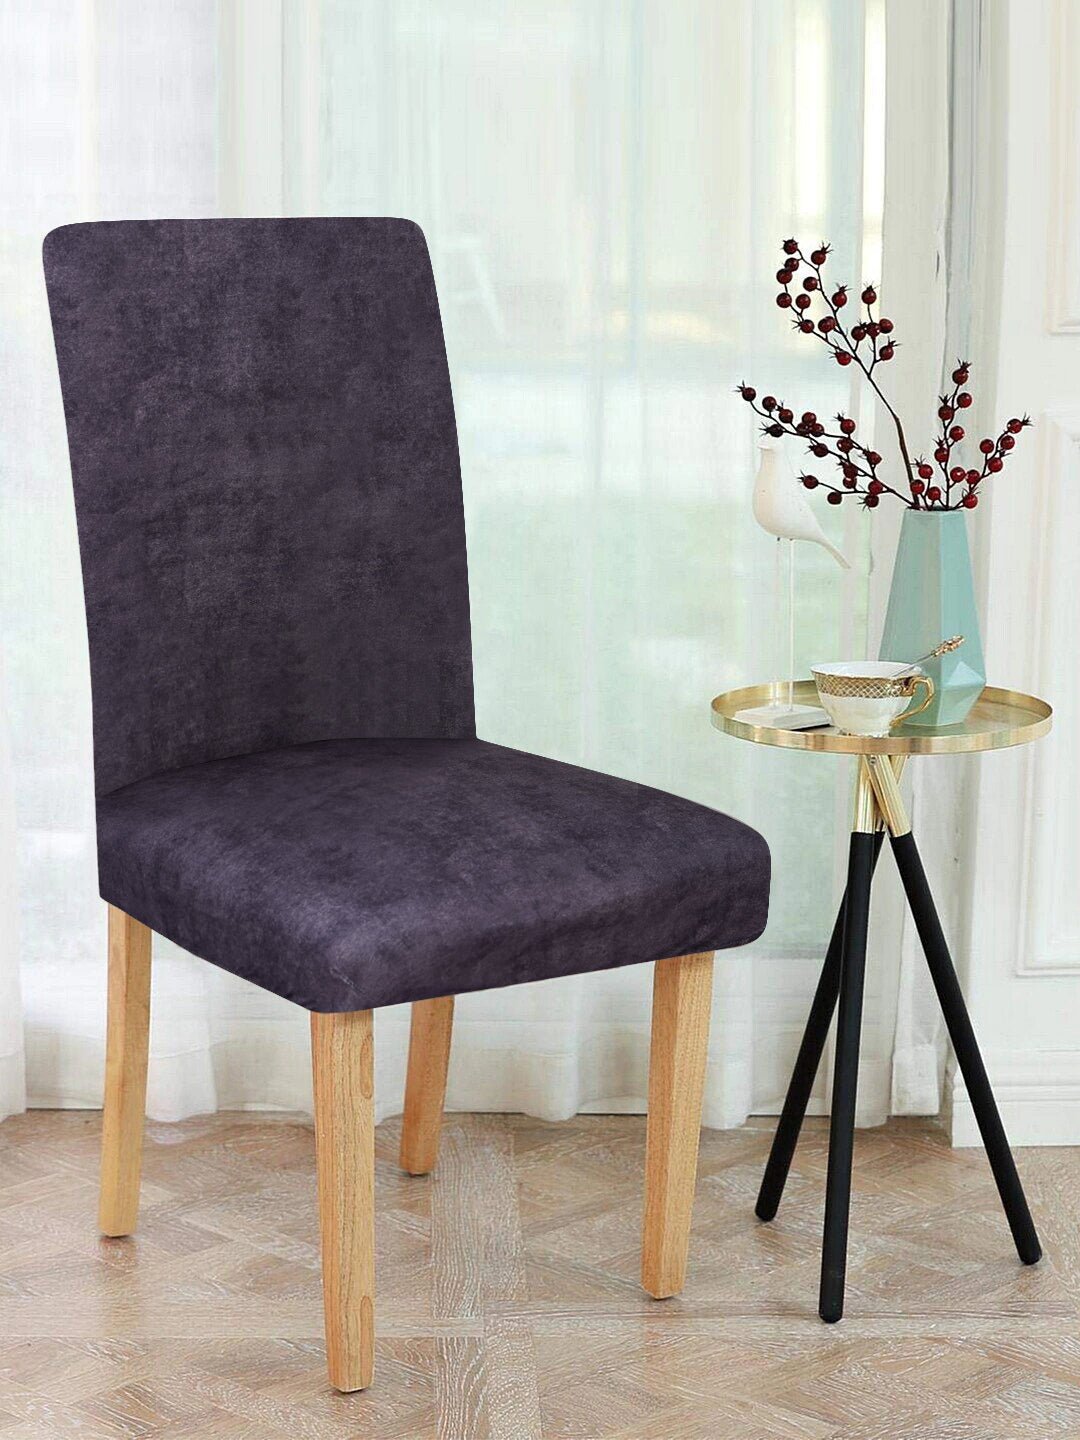 Magic Universal Chair Cover - Gray Velvet , Small bedroom chair covers, bedroom chair slip covers, chairs covers near me, chairs covers set of 6, chair slipcovers for dining table, chair covers set of 6 in india, chair covers online,- DivineTrendz